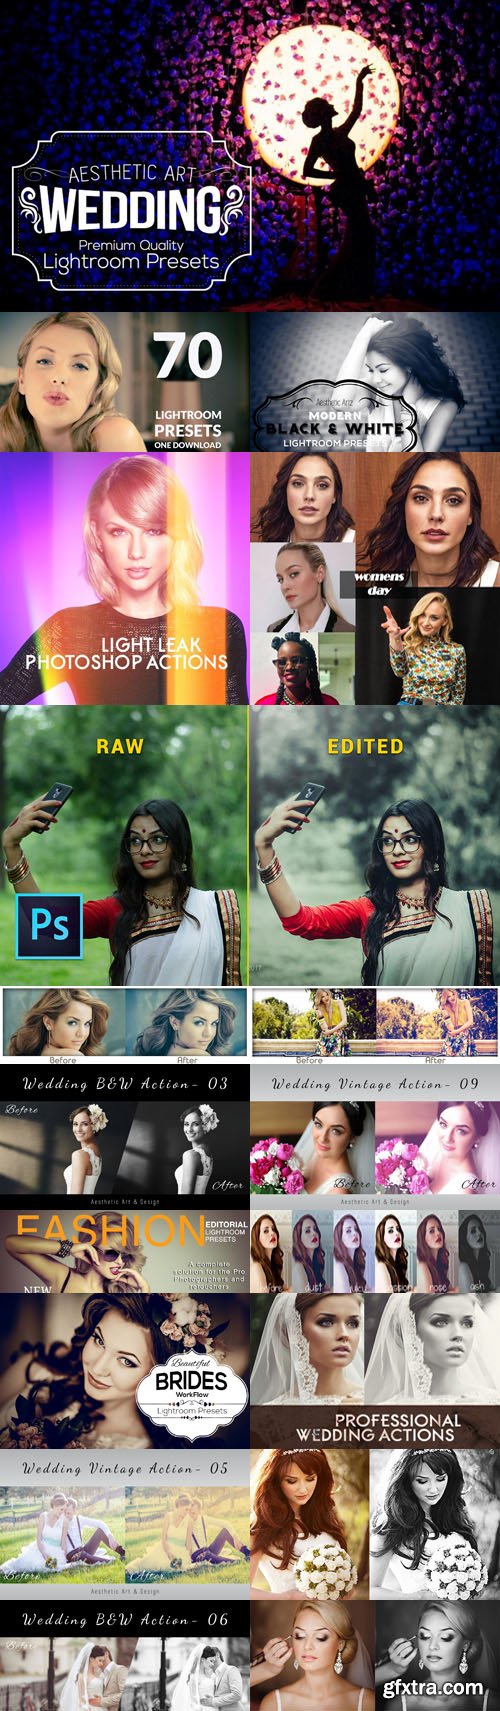 Best Photo Editing Lightroom Presets & Photoshop Actions for Photographers & Designers